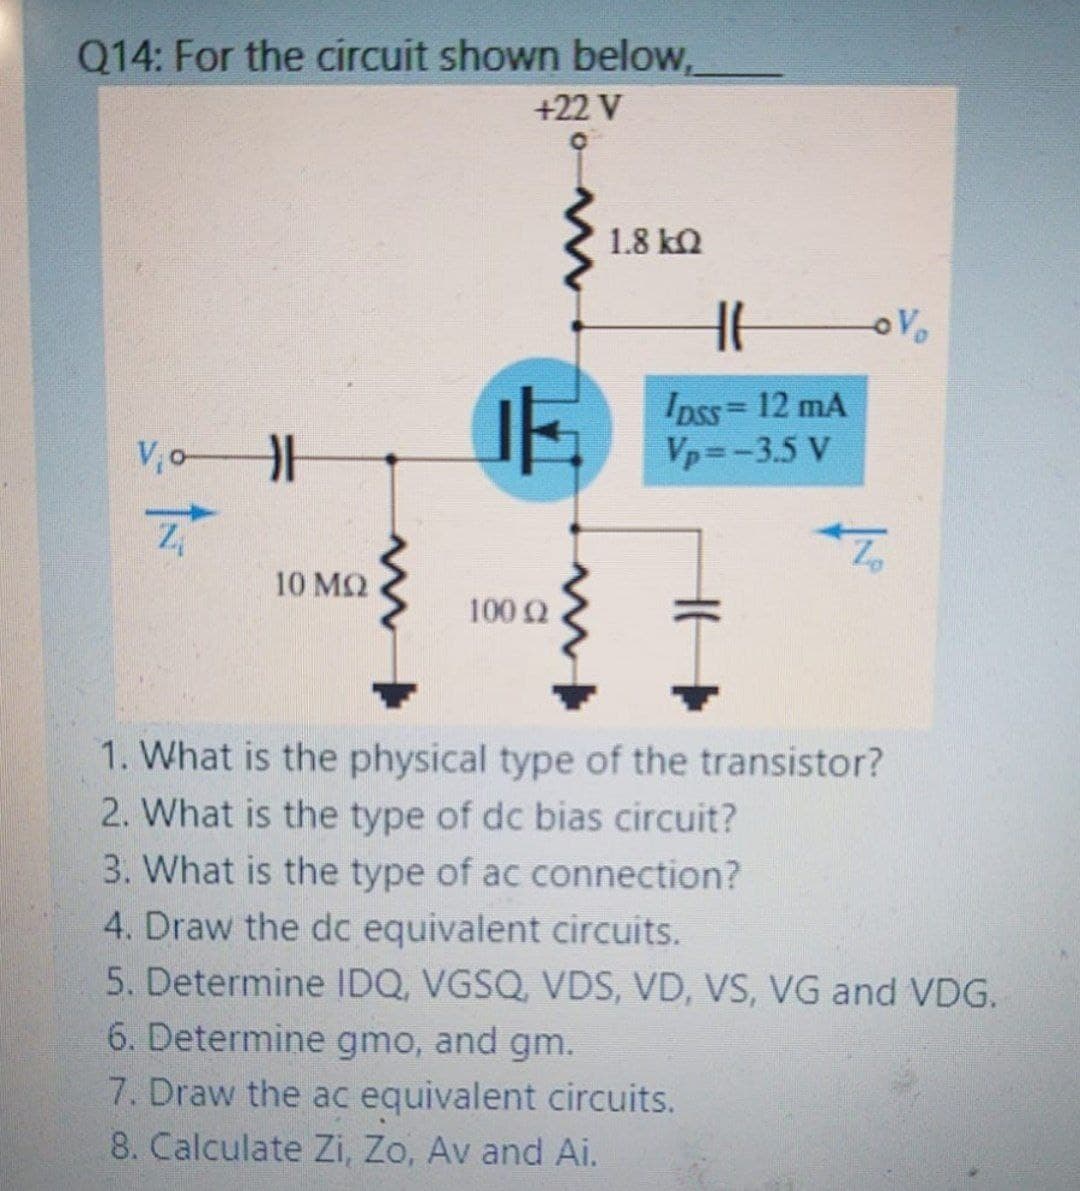 Q14: For the circuit shown below,
+22 V
1.8 kQ
Ipss= 12 mA
Vp=-3.5 V
VoH
10 MQ
100 2
1. What is the physical type of the transistor?
2. What is the type of dc bias circuit?
3. What is the type of ac connection?
4. Draw the dc equivalent circuits.
5. Determine IDQ, VGSQ, VDS, VD, VS, VG and VDG.
6. Determine gmo, and gm.
7. Draw the ac equivalent circuits.
8. Calculate Zi, Zo, Av and Ai.
